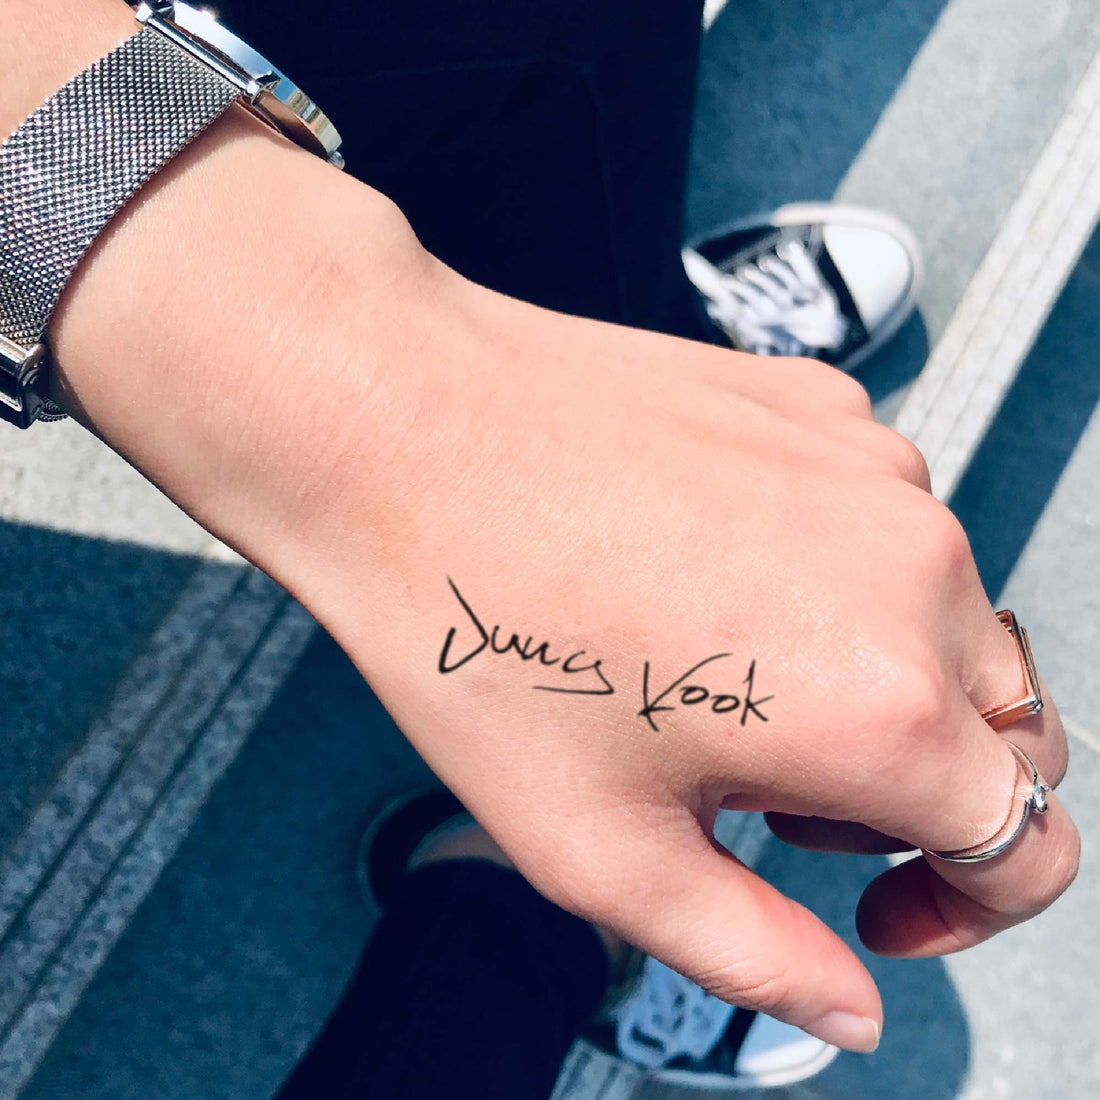 Jung Kook custom temporary tattoo sticker design idea inspiration meanings removal arm wrist hand words font name signature calligraphy lyrics tour concert outfits merch accessory gift souvenir costumes wear dress up code